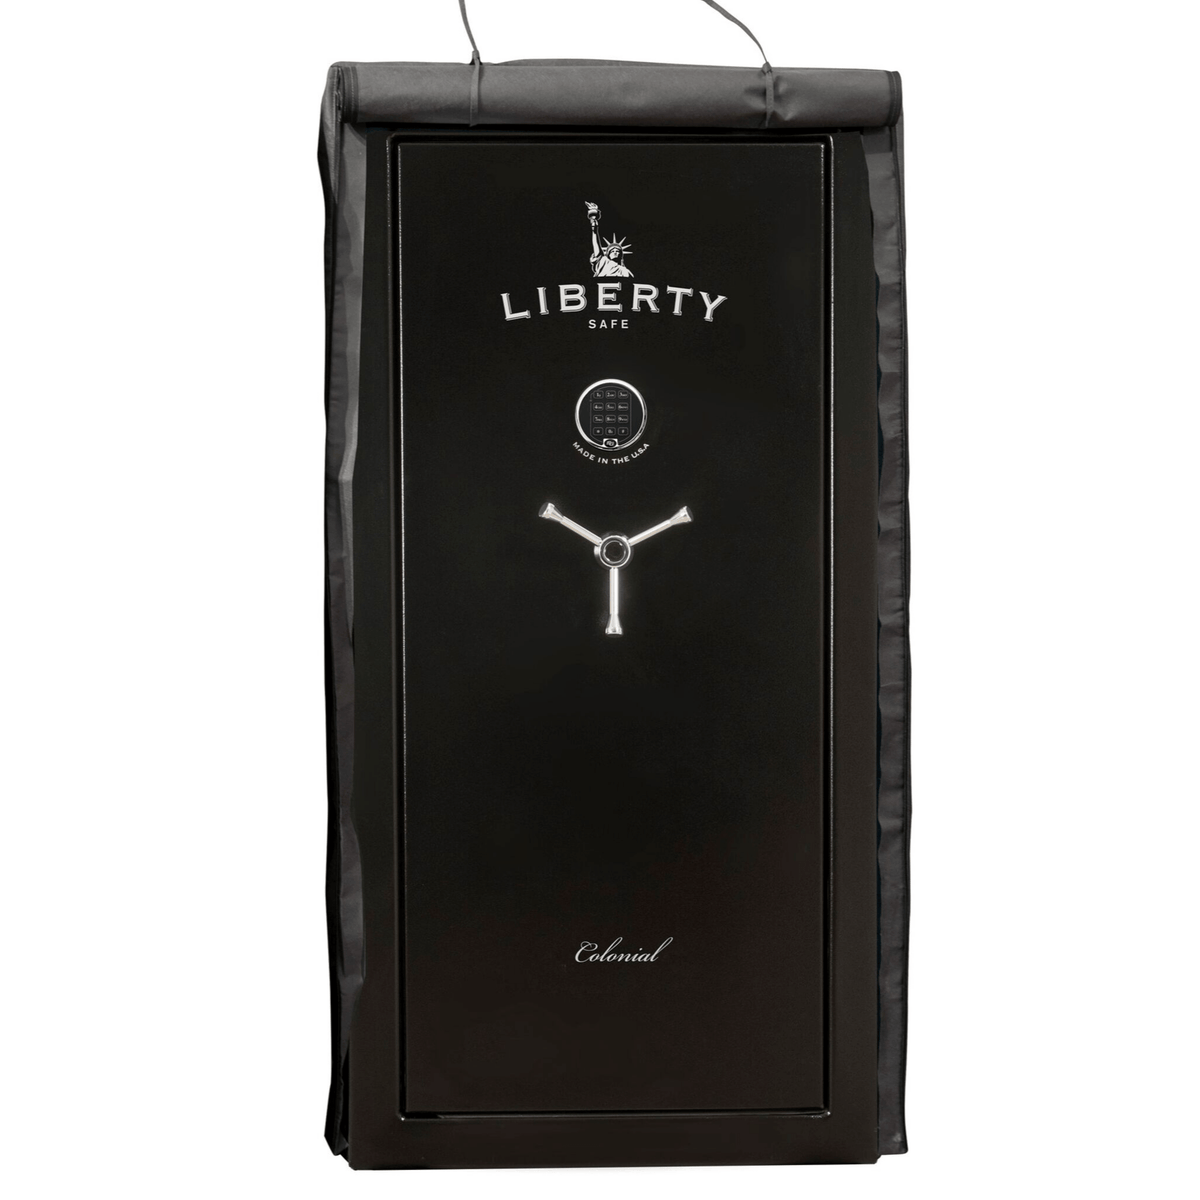 Accessory - Security - Safe Cover - 20-25 size safes | Liberty Safe Norcal.